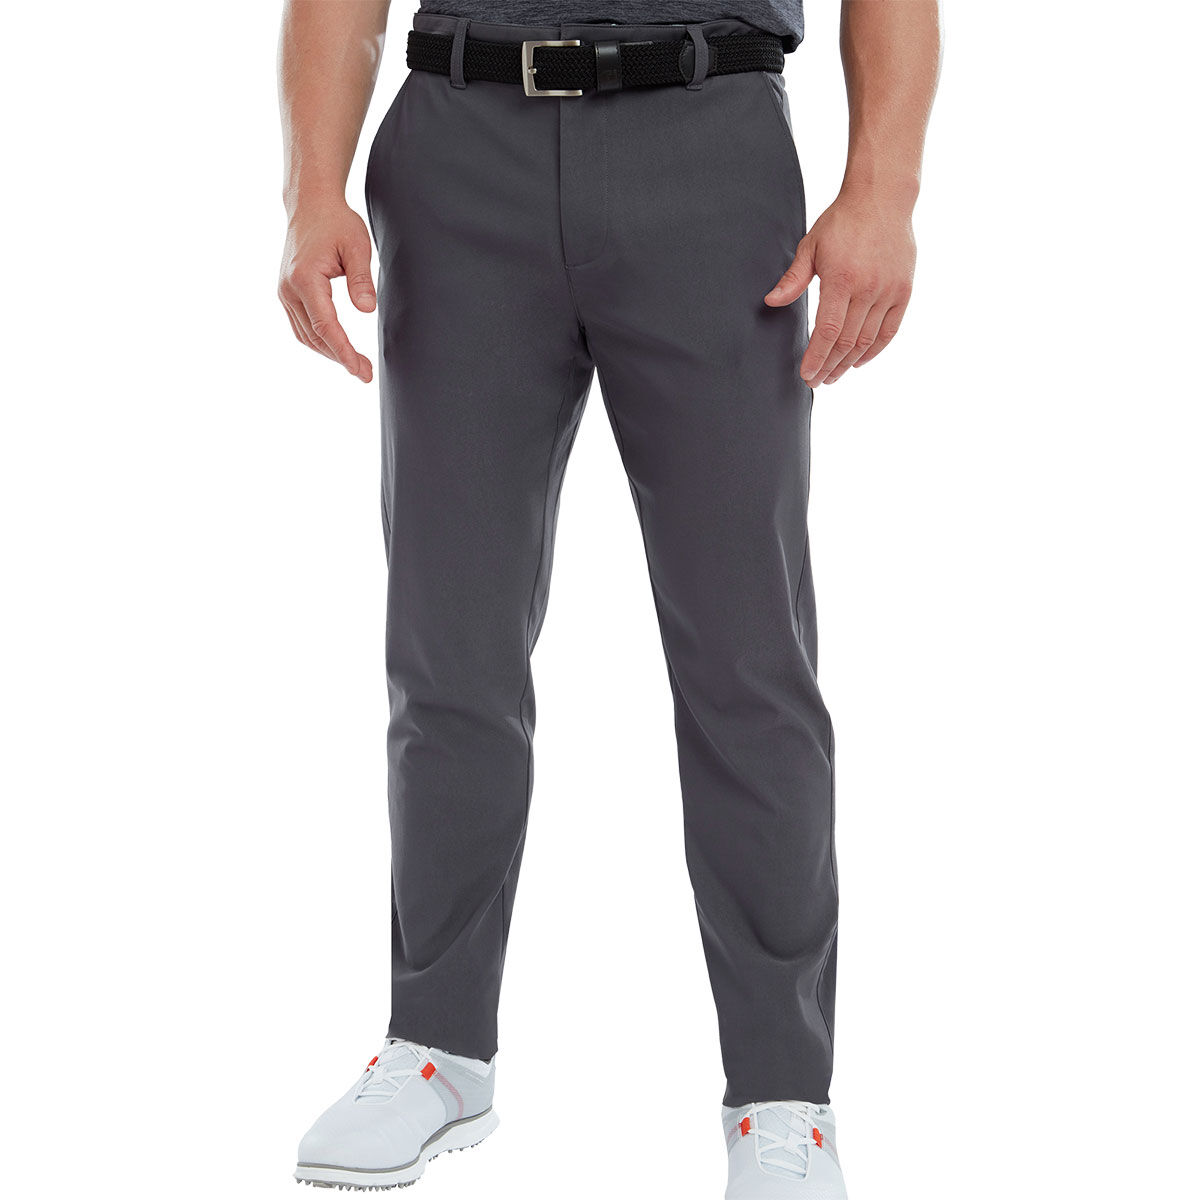 FootJoy Grey ThermoSeries Regular Fit Golf Trousers, Size: 38 | American Golf